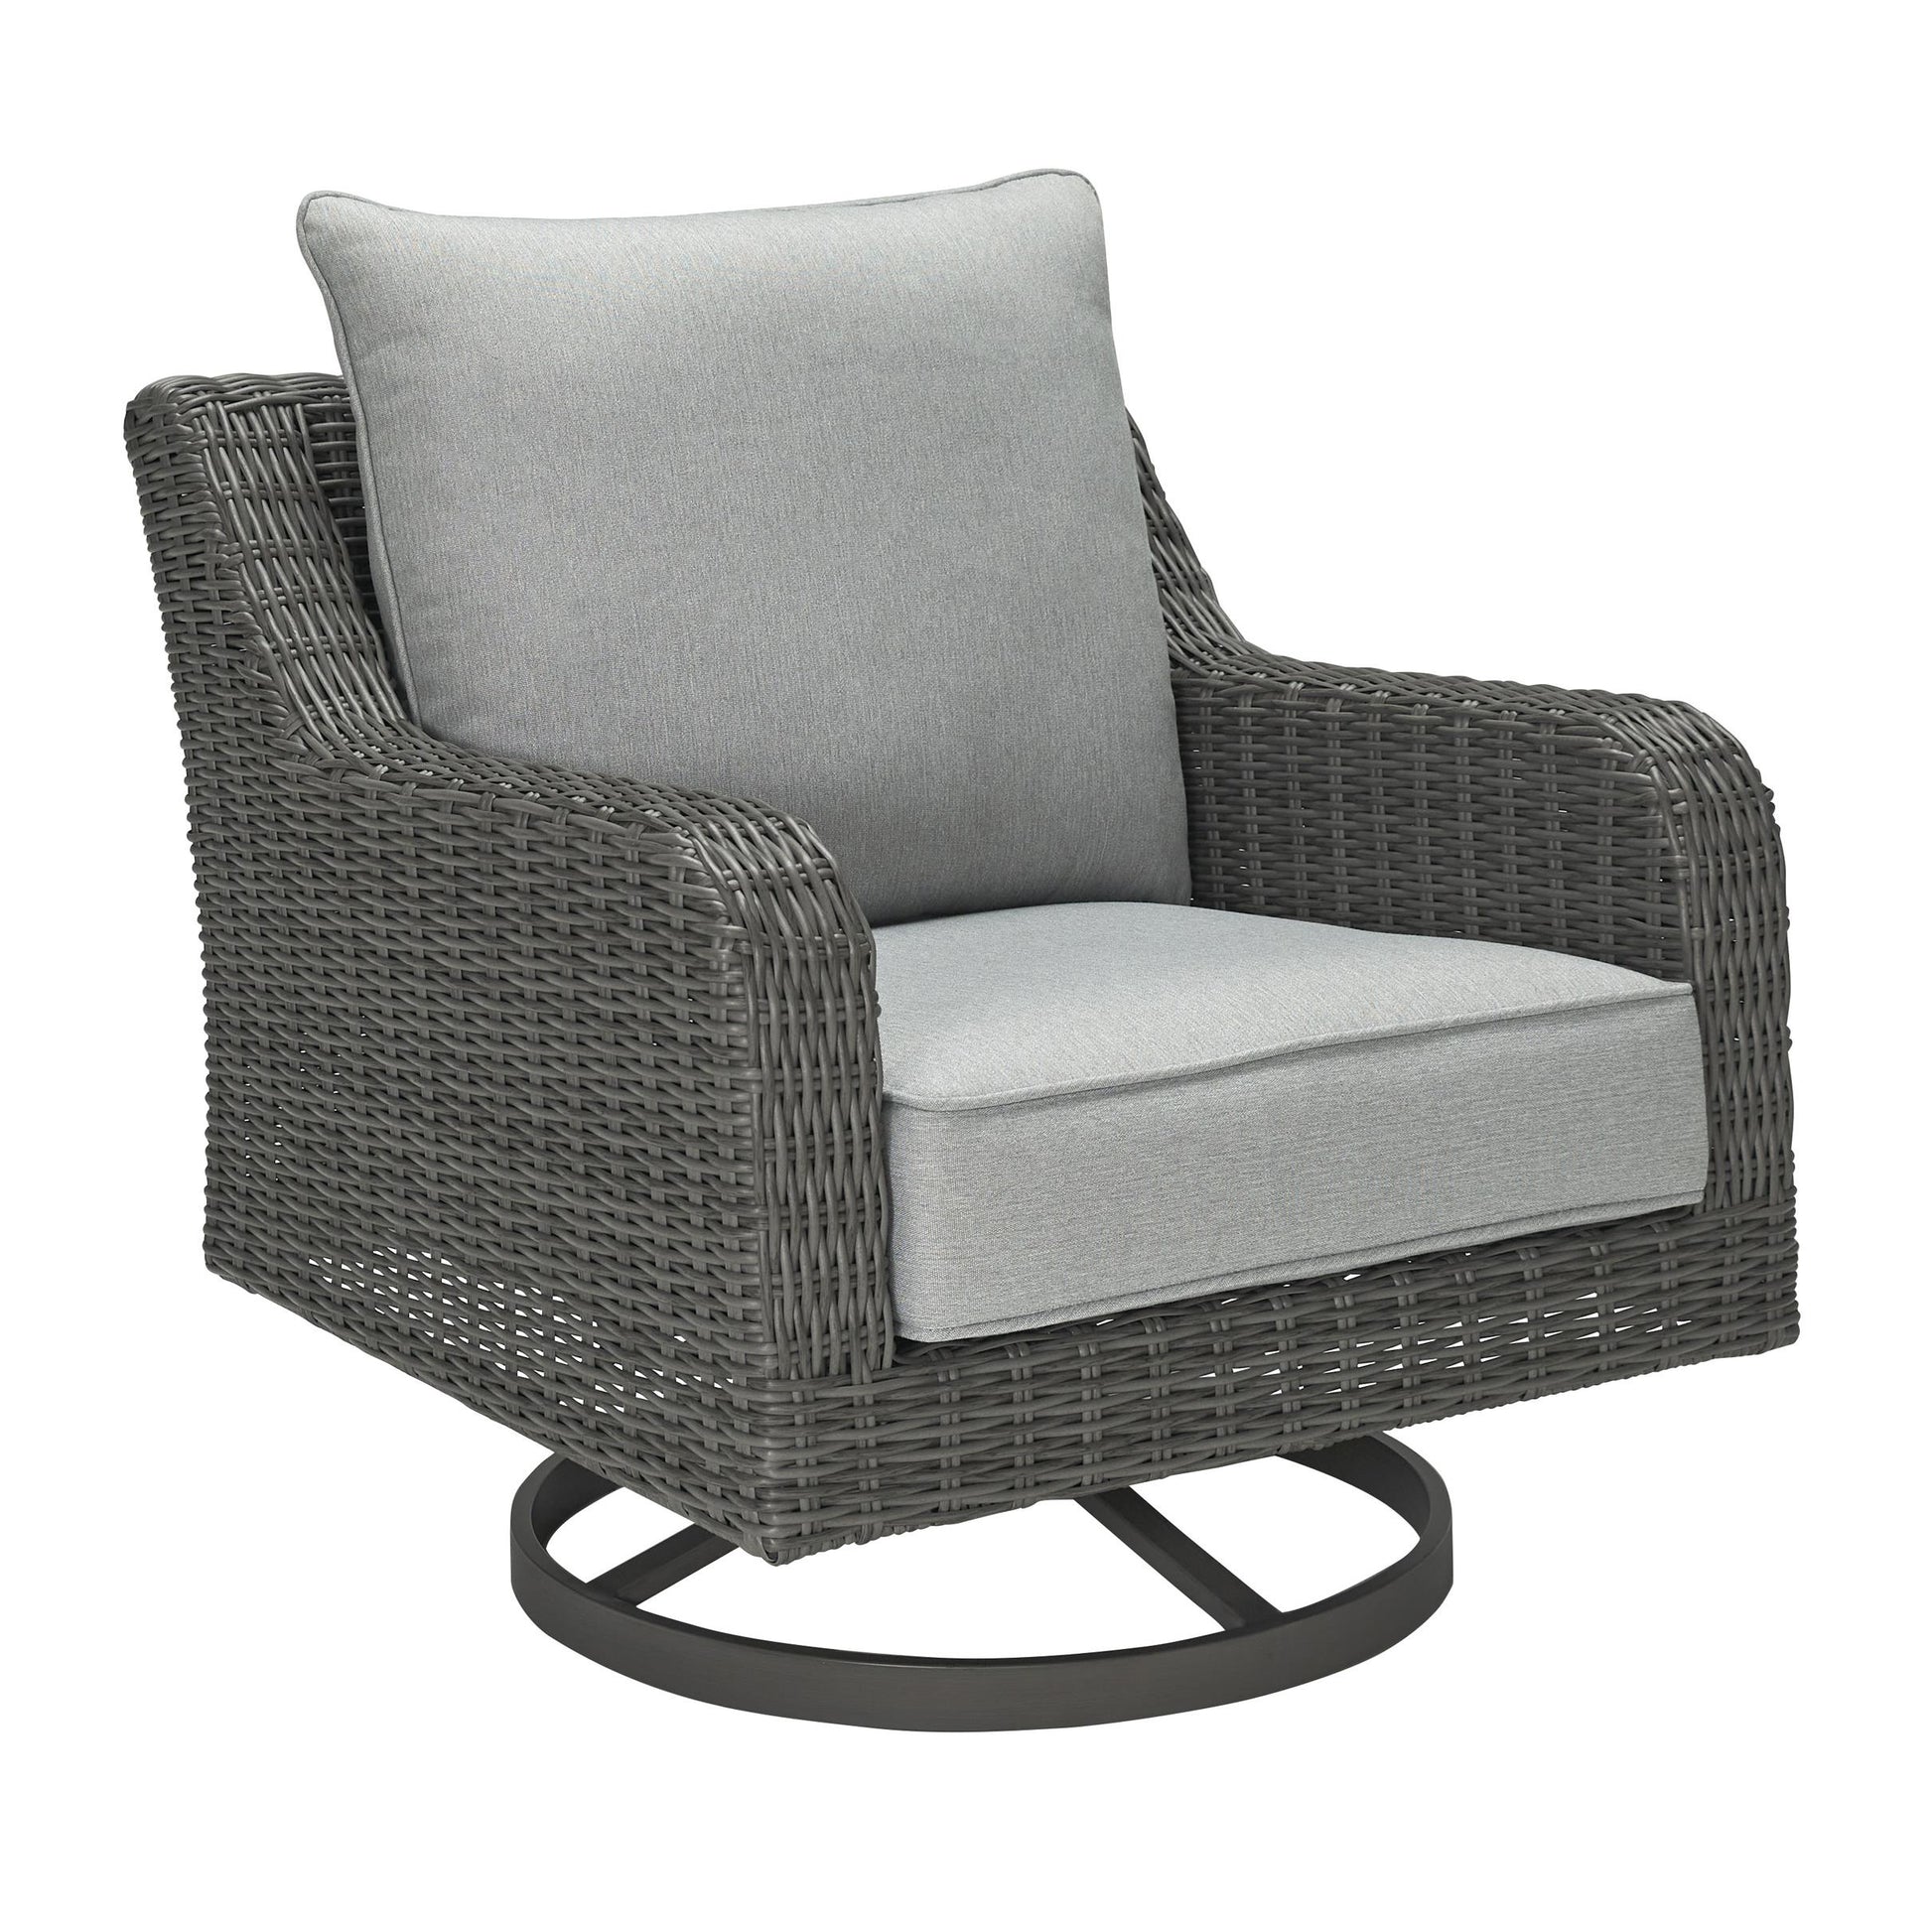 Signature Design by Ashley Outdoor Seating Lounge Chairs P518-821 IMAGE 1